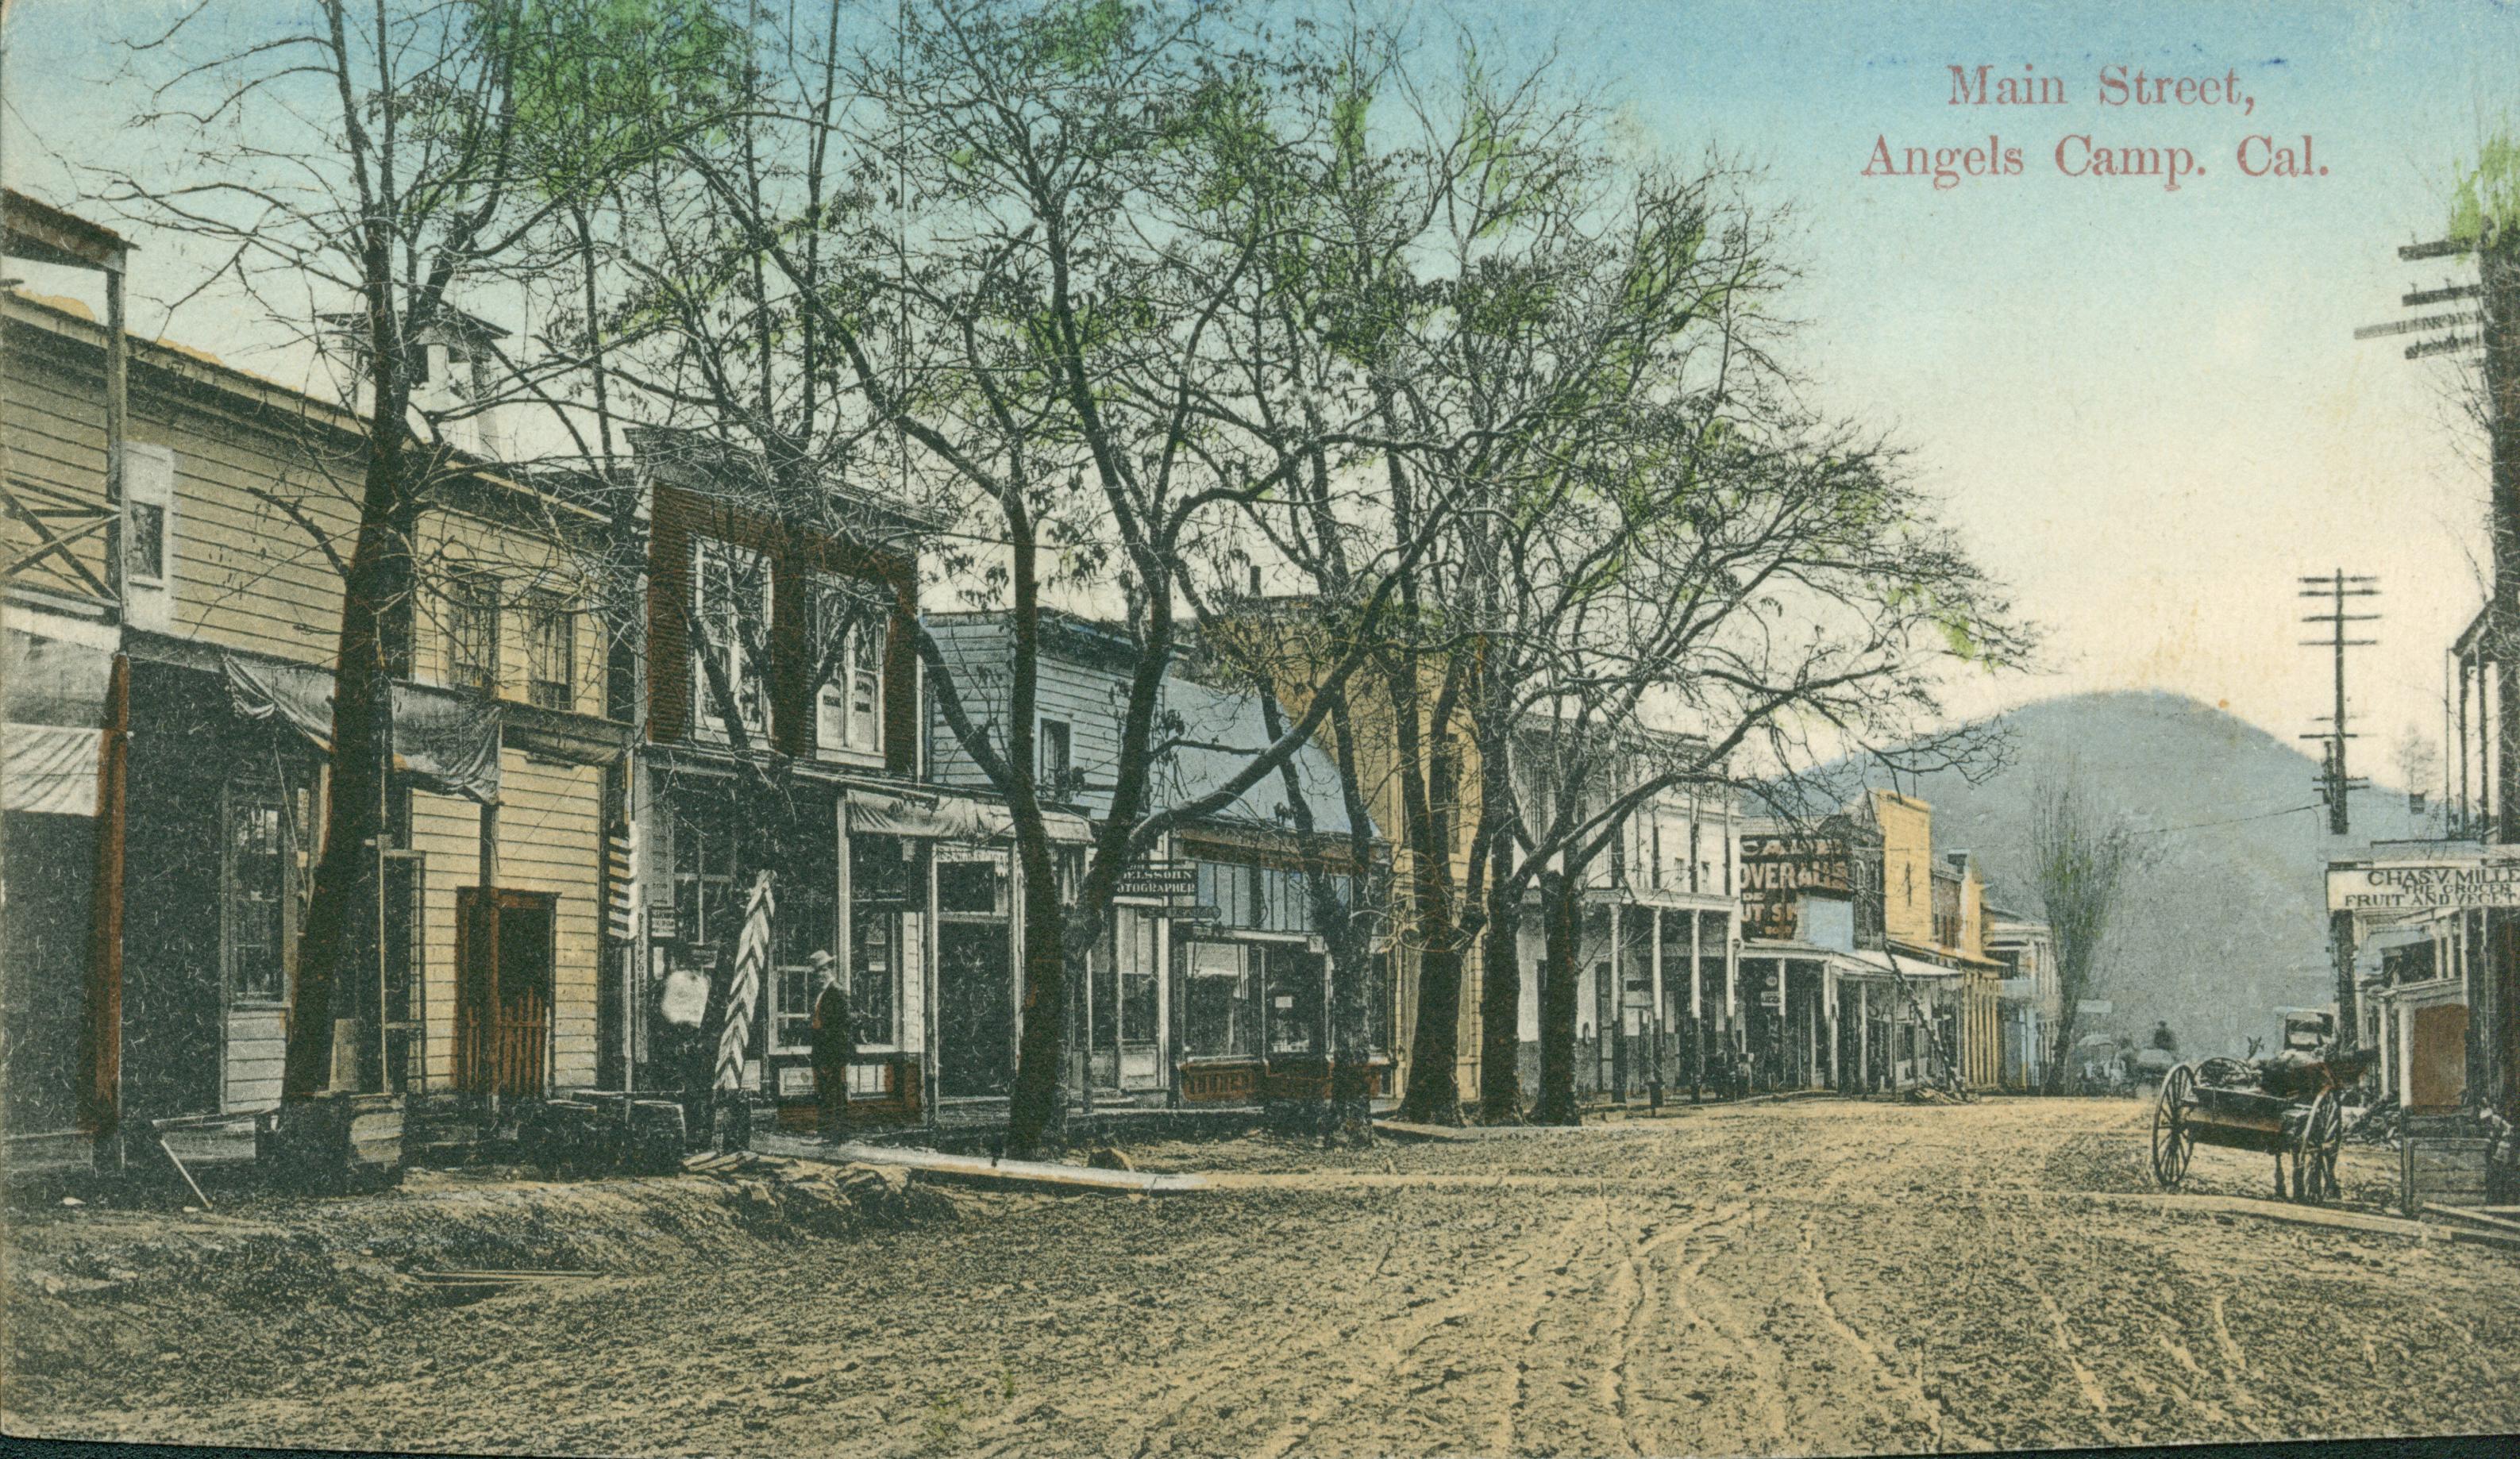 Shows Main Street in Angels camp, lined by buildings